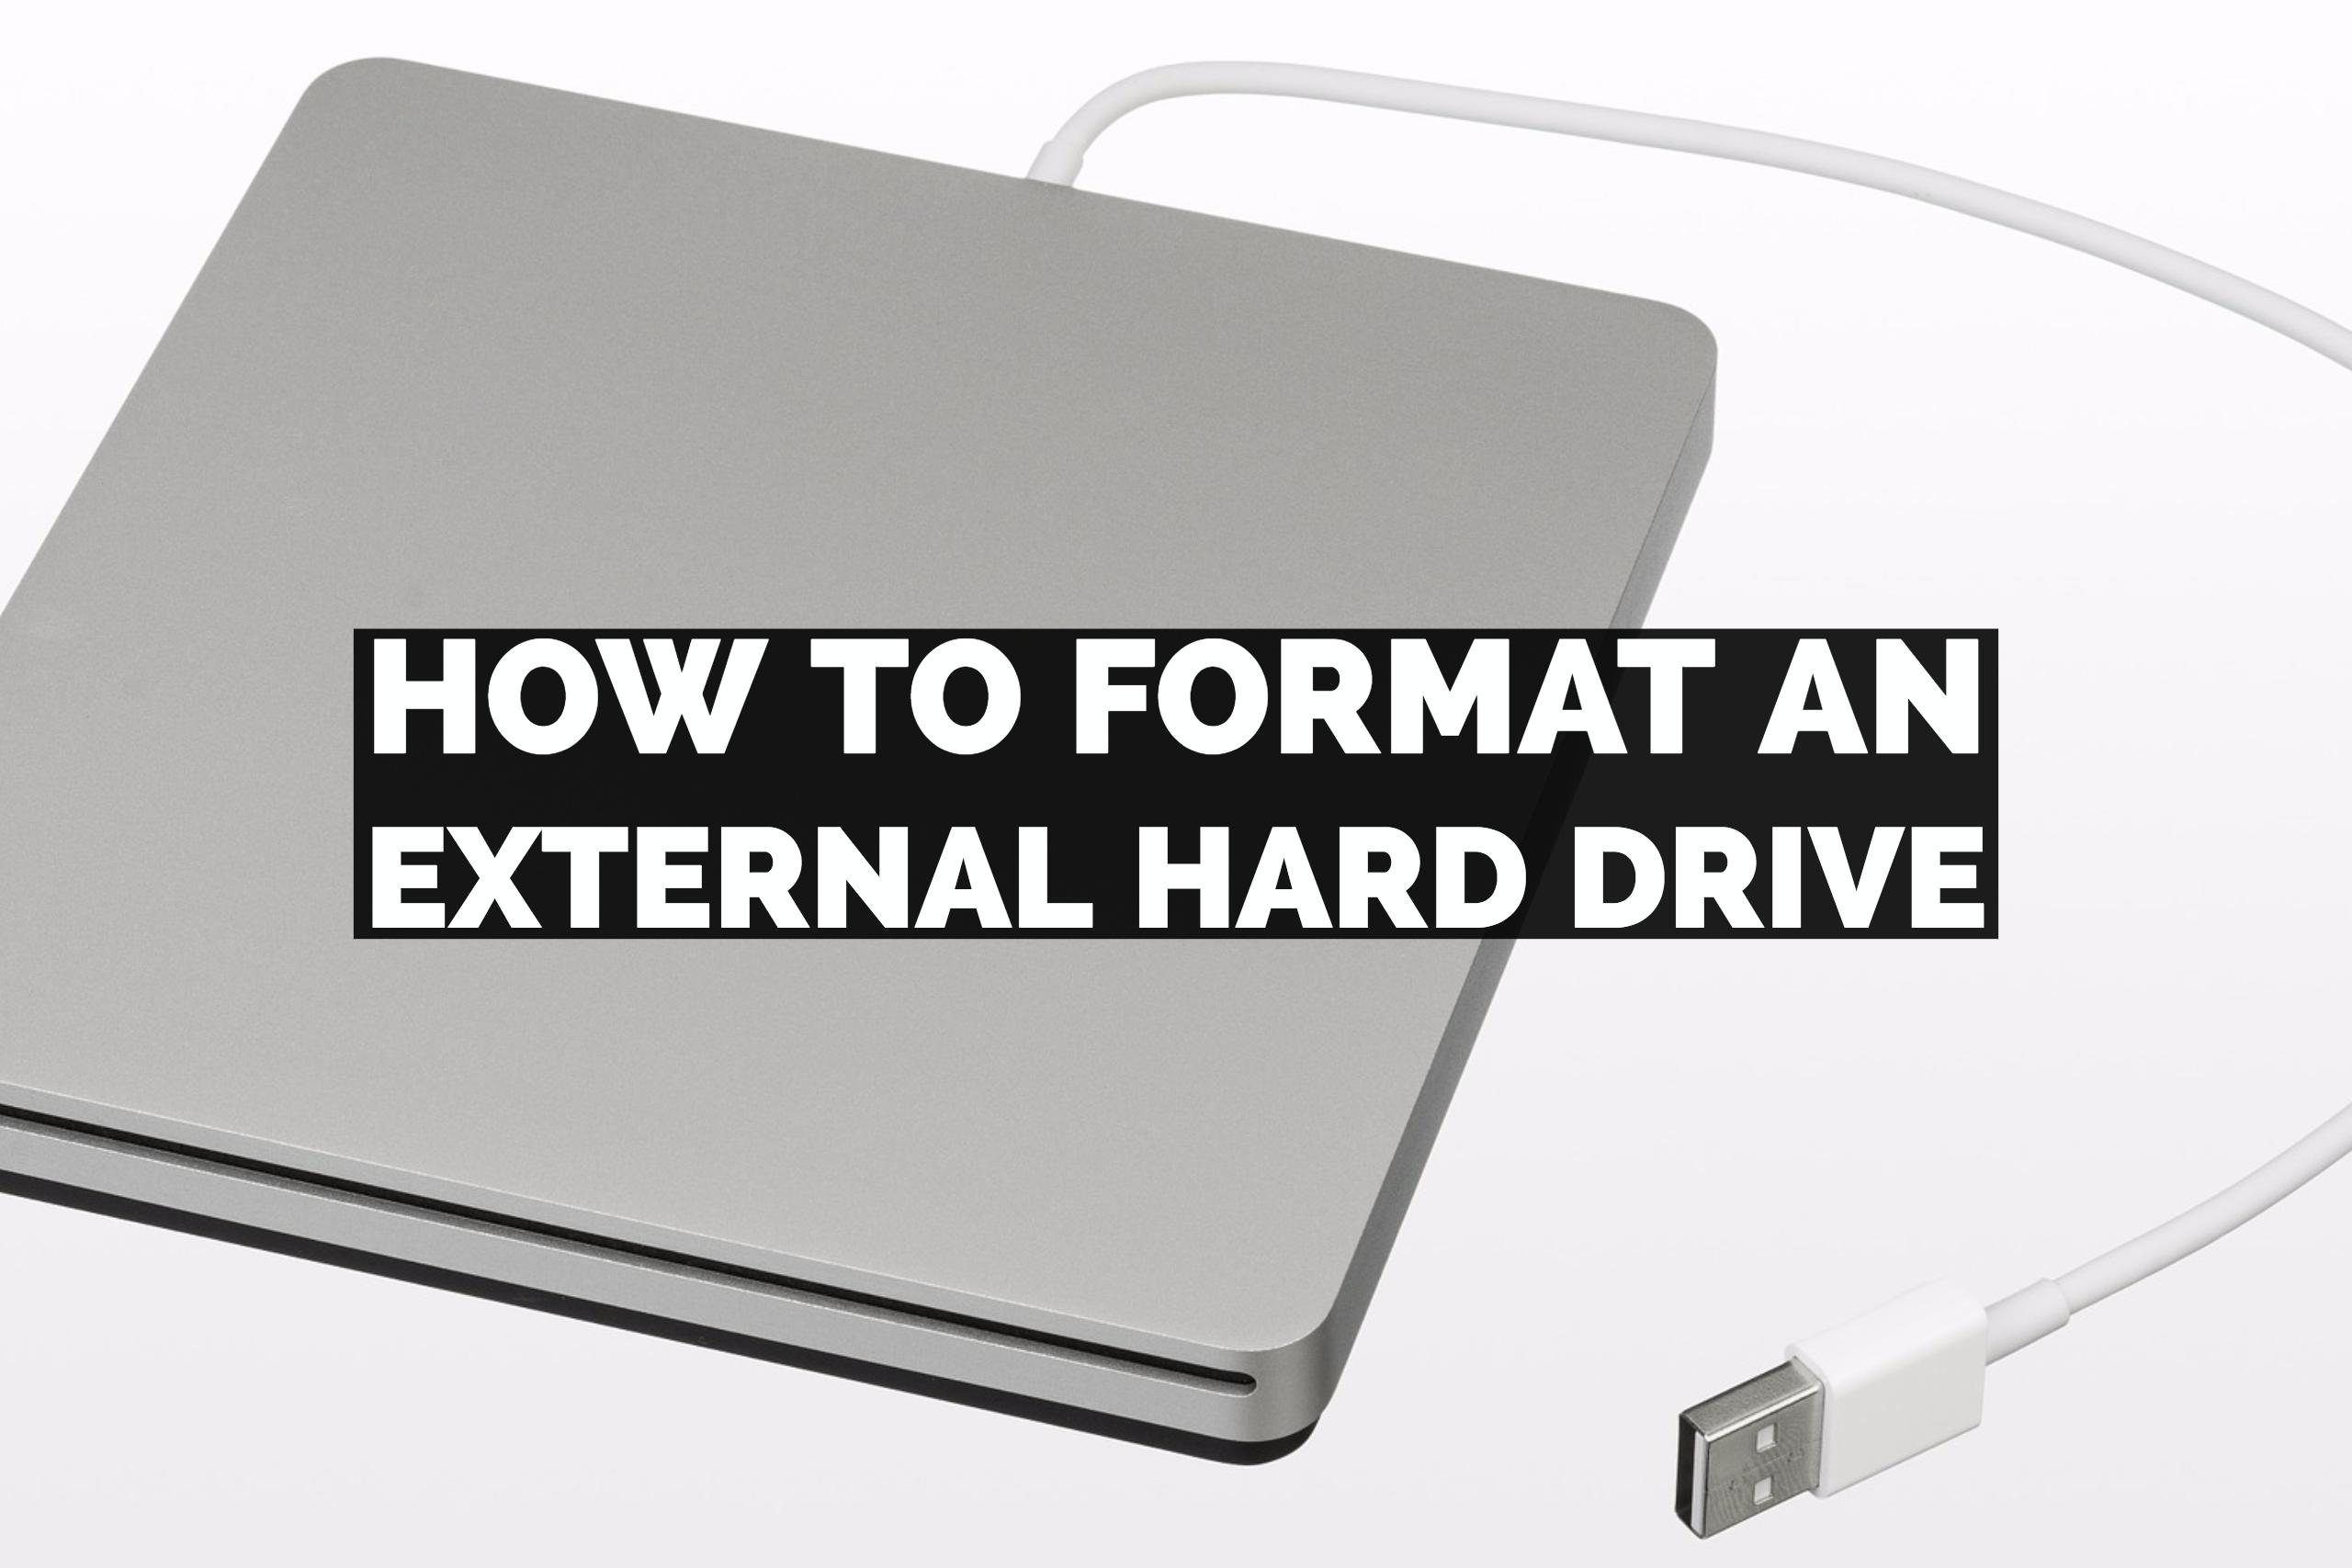 format an exteernal drive for photos that can be read by either windows and mac os10